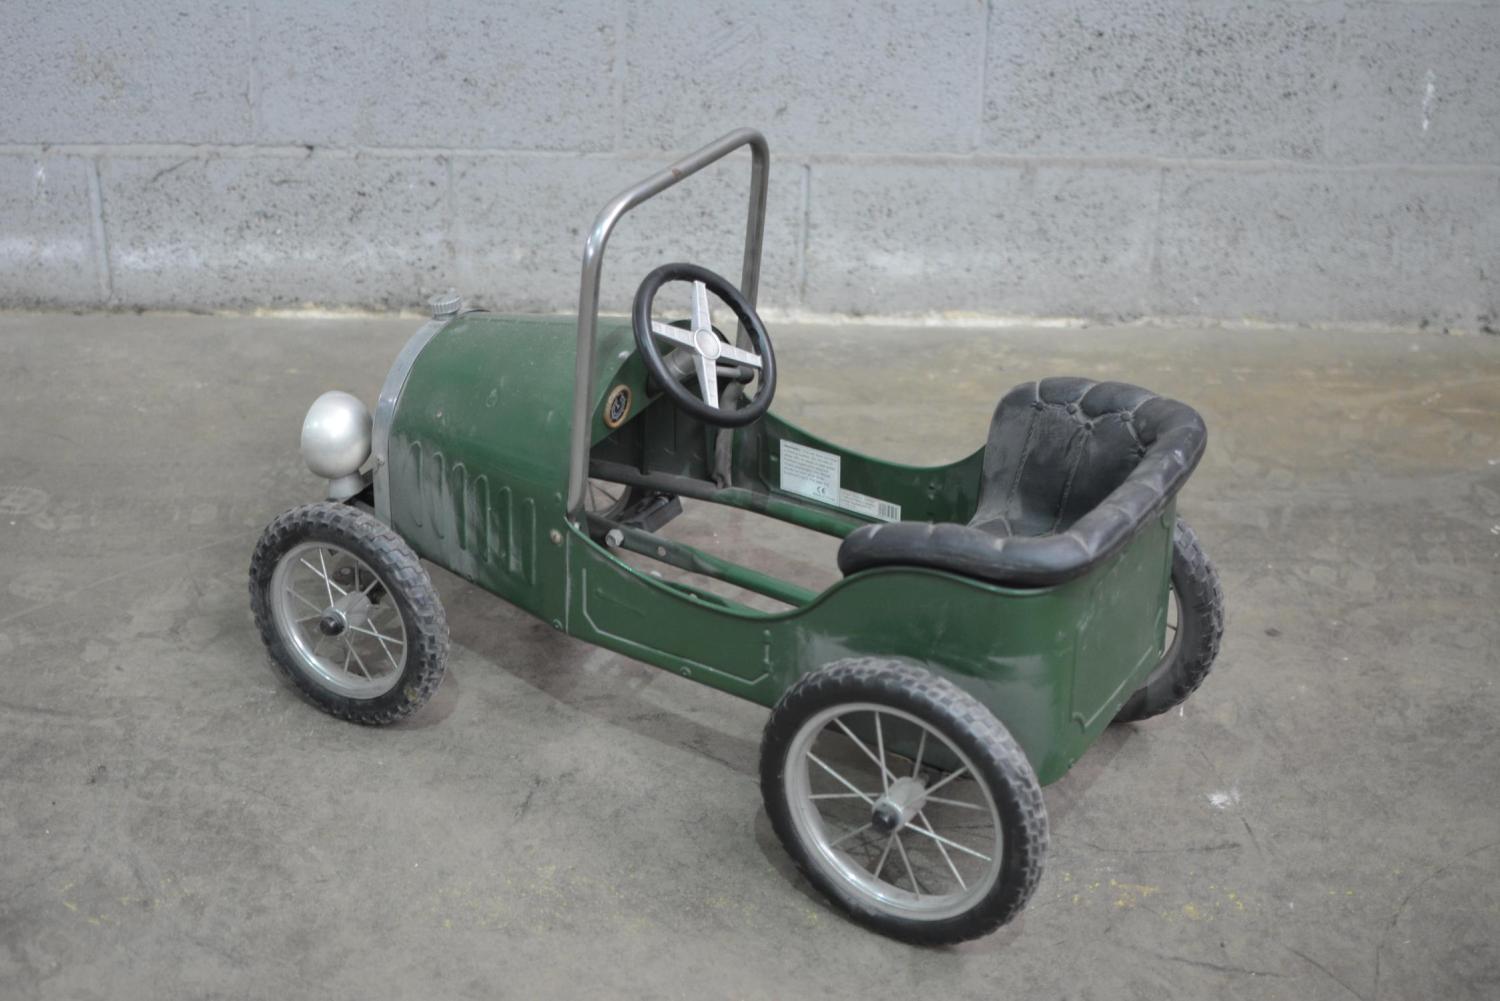 Check Out These Awesome Old Pedal Cars Being Auctioned This Month